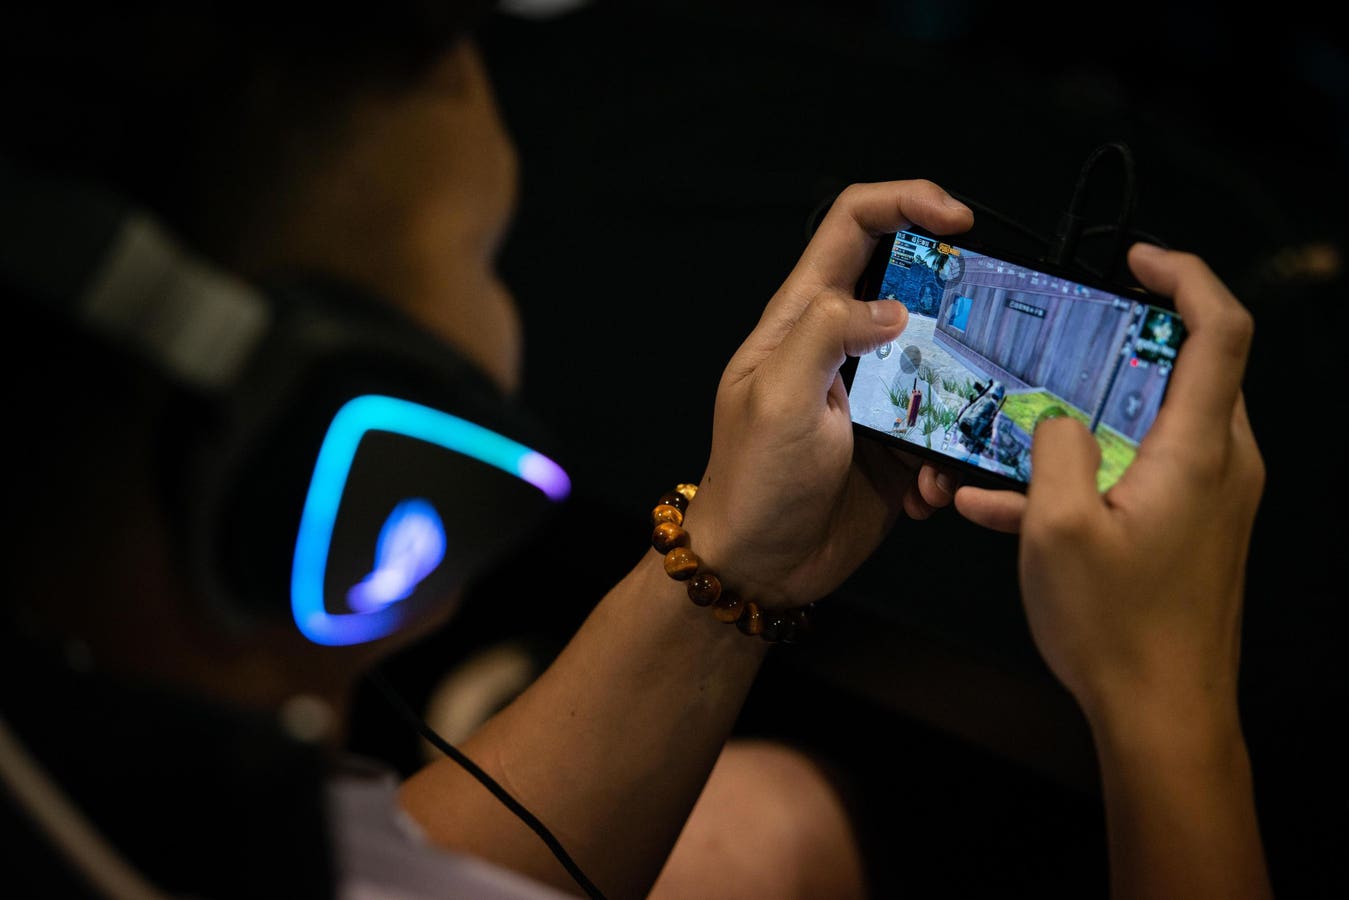 China Plans New Gaming Curbs In Another Big Blow To Tech Giants Tencent, NetEase